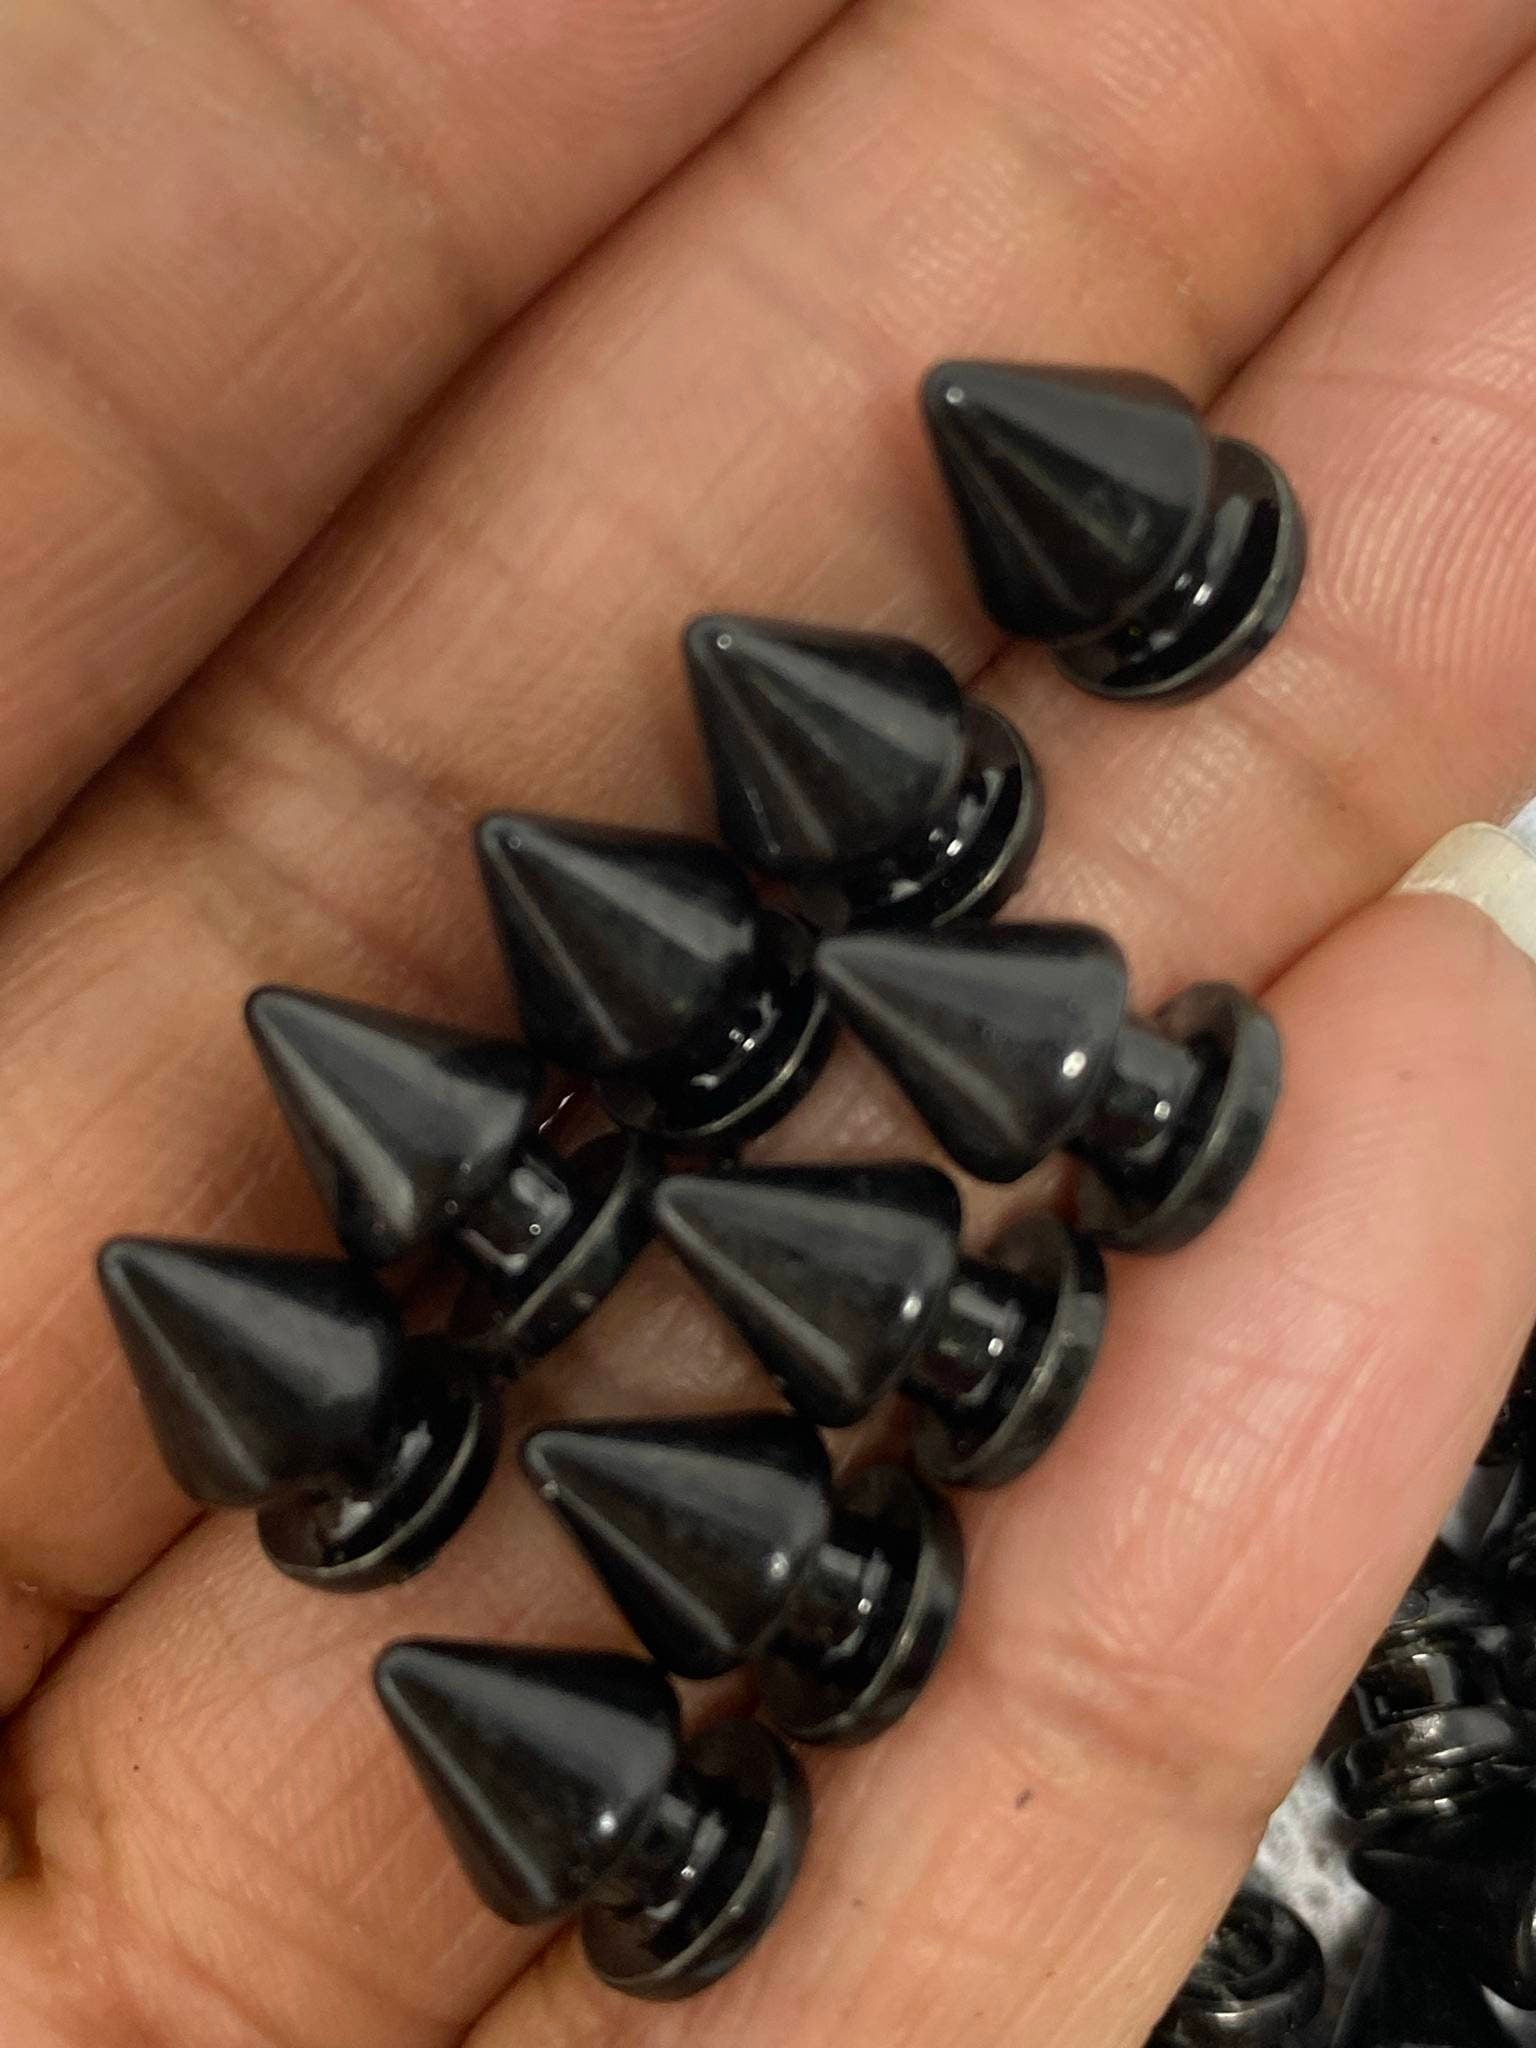 New,Black Spikes, 12mm, 100-pcs, Spikes w/Screws, Small Cone Spikes &  Studs, Metallic Screw-Back for DIY Punk, Leather, Bags, and Apparel